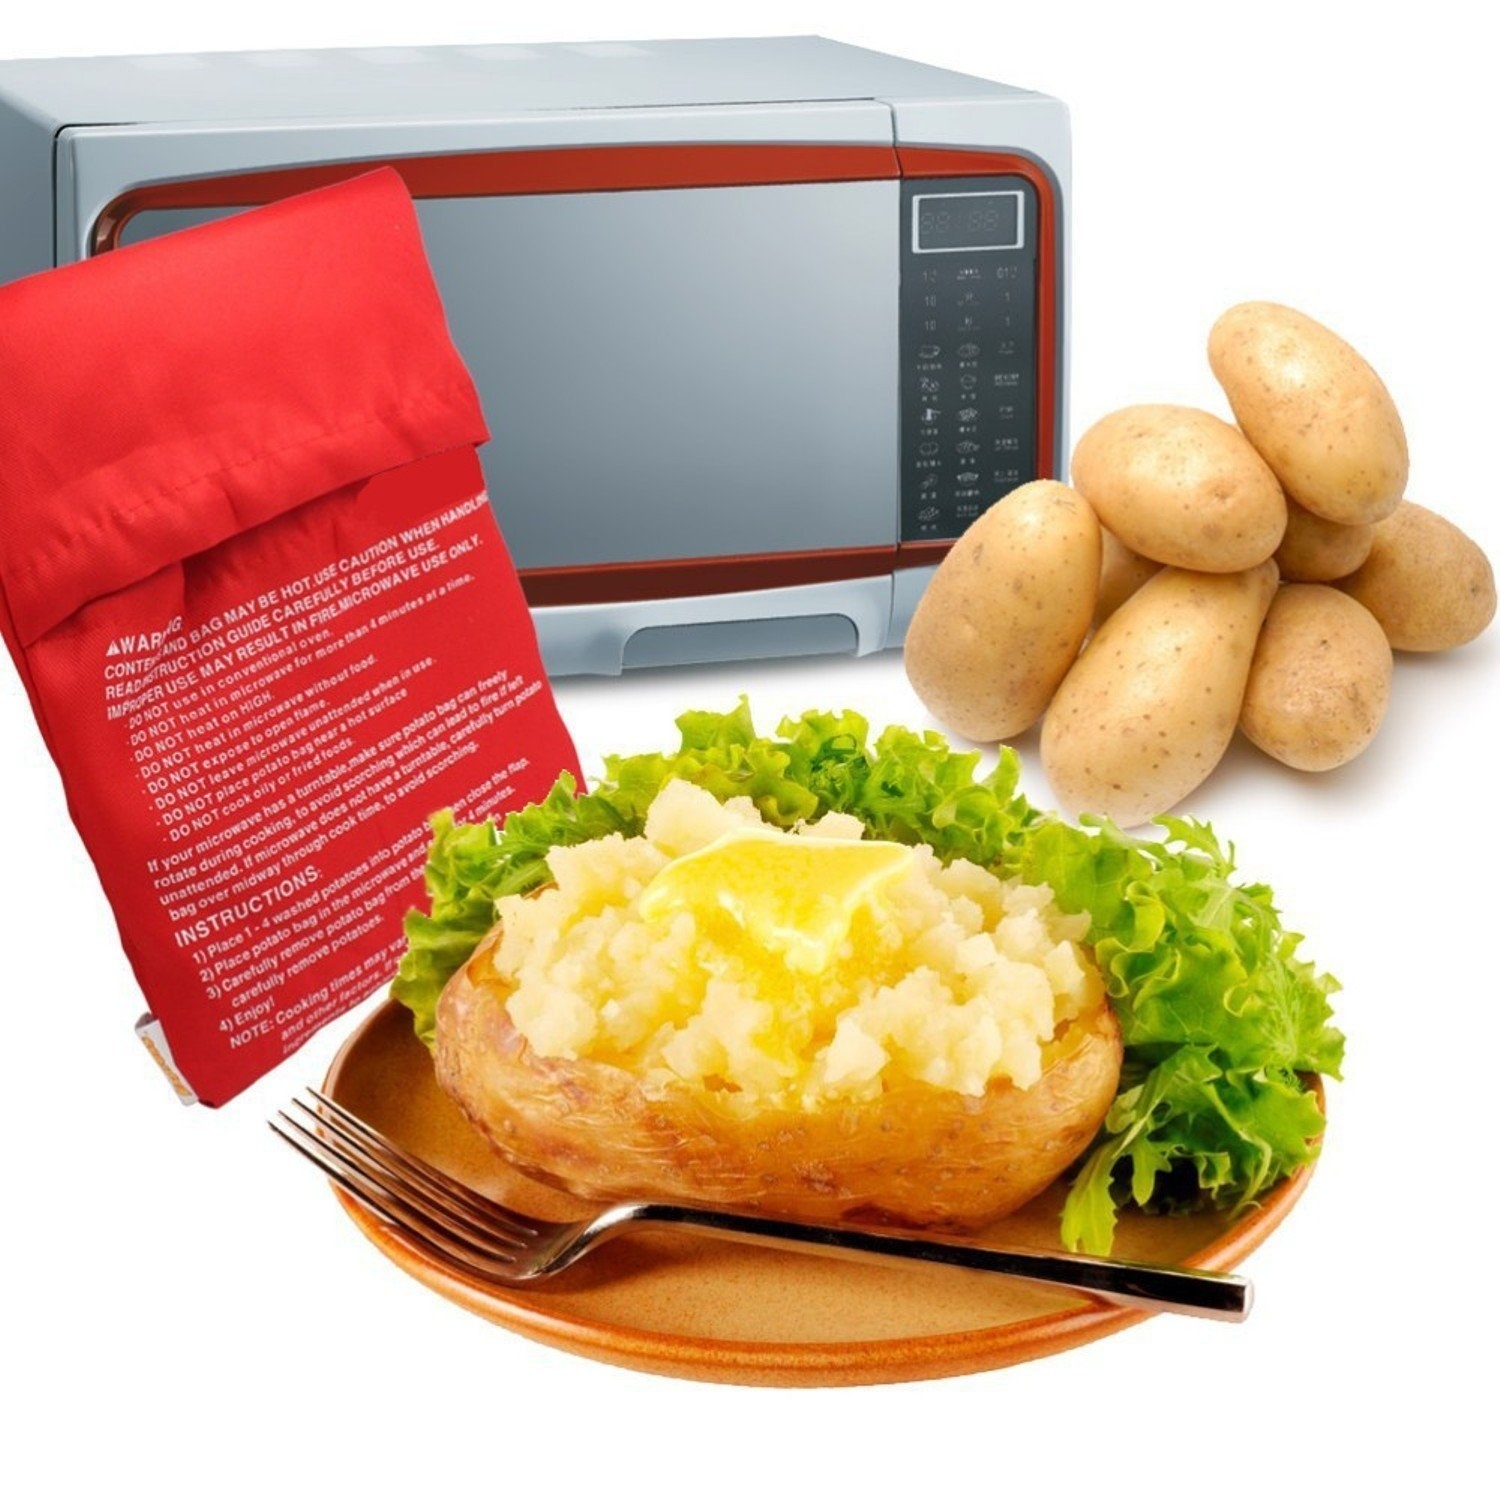 Kitchen tool of the day – microwave